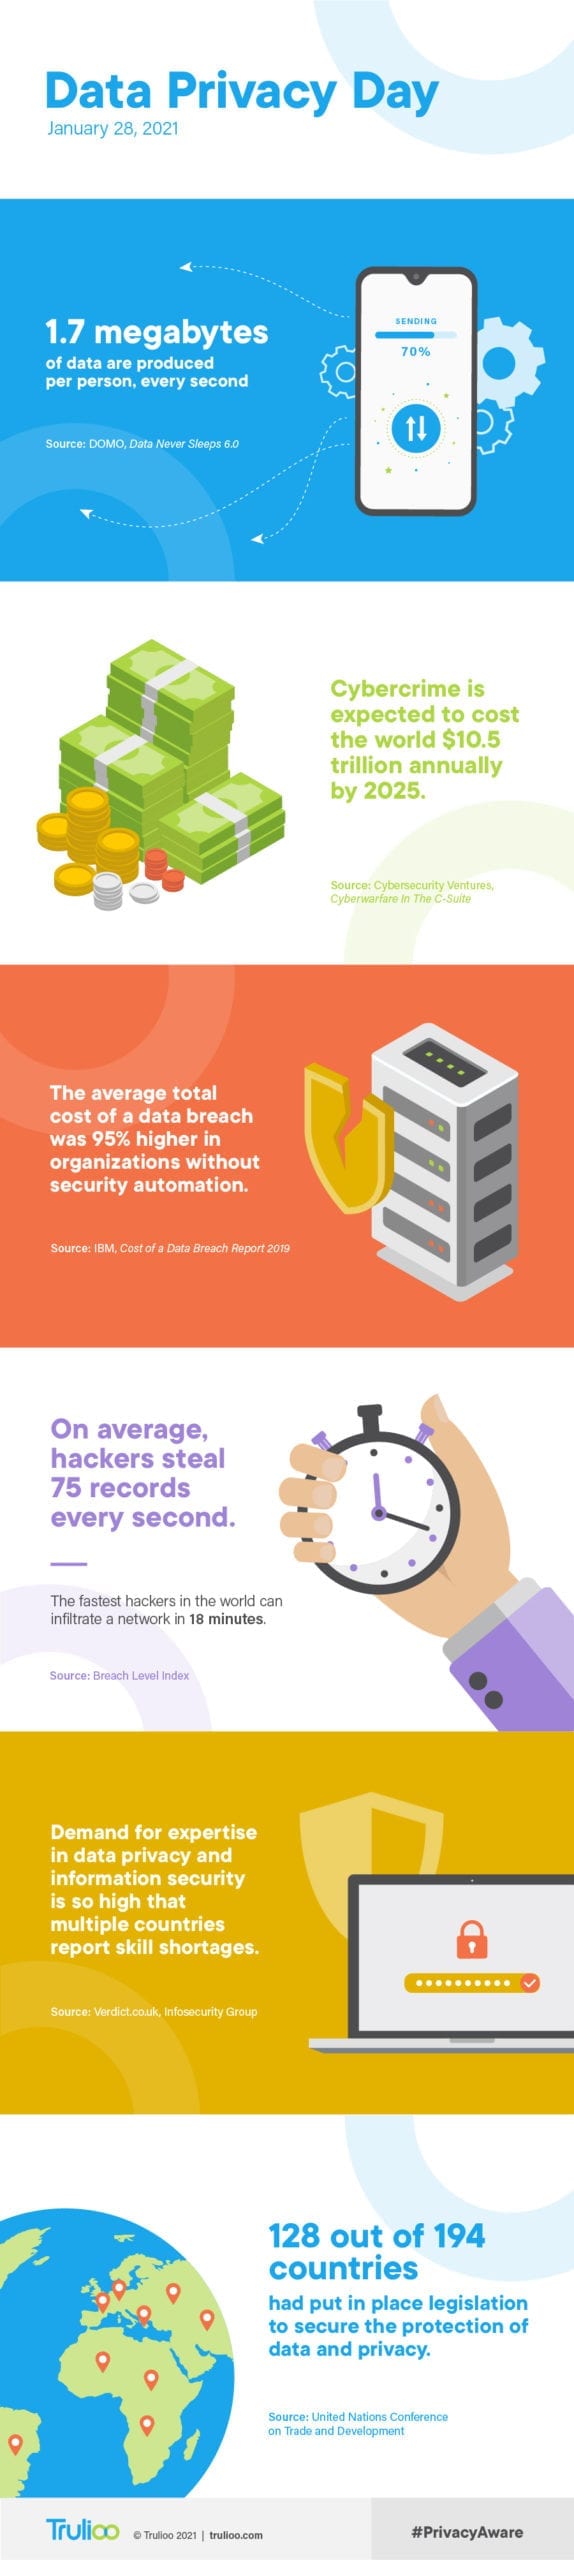 Data Privacy Day Infographic 2021